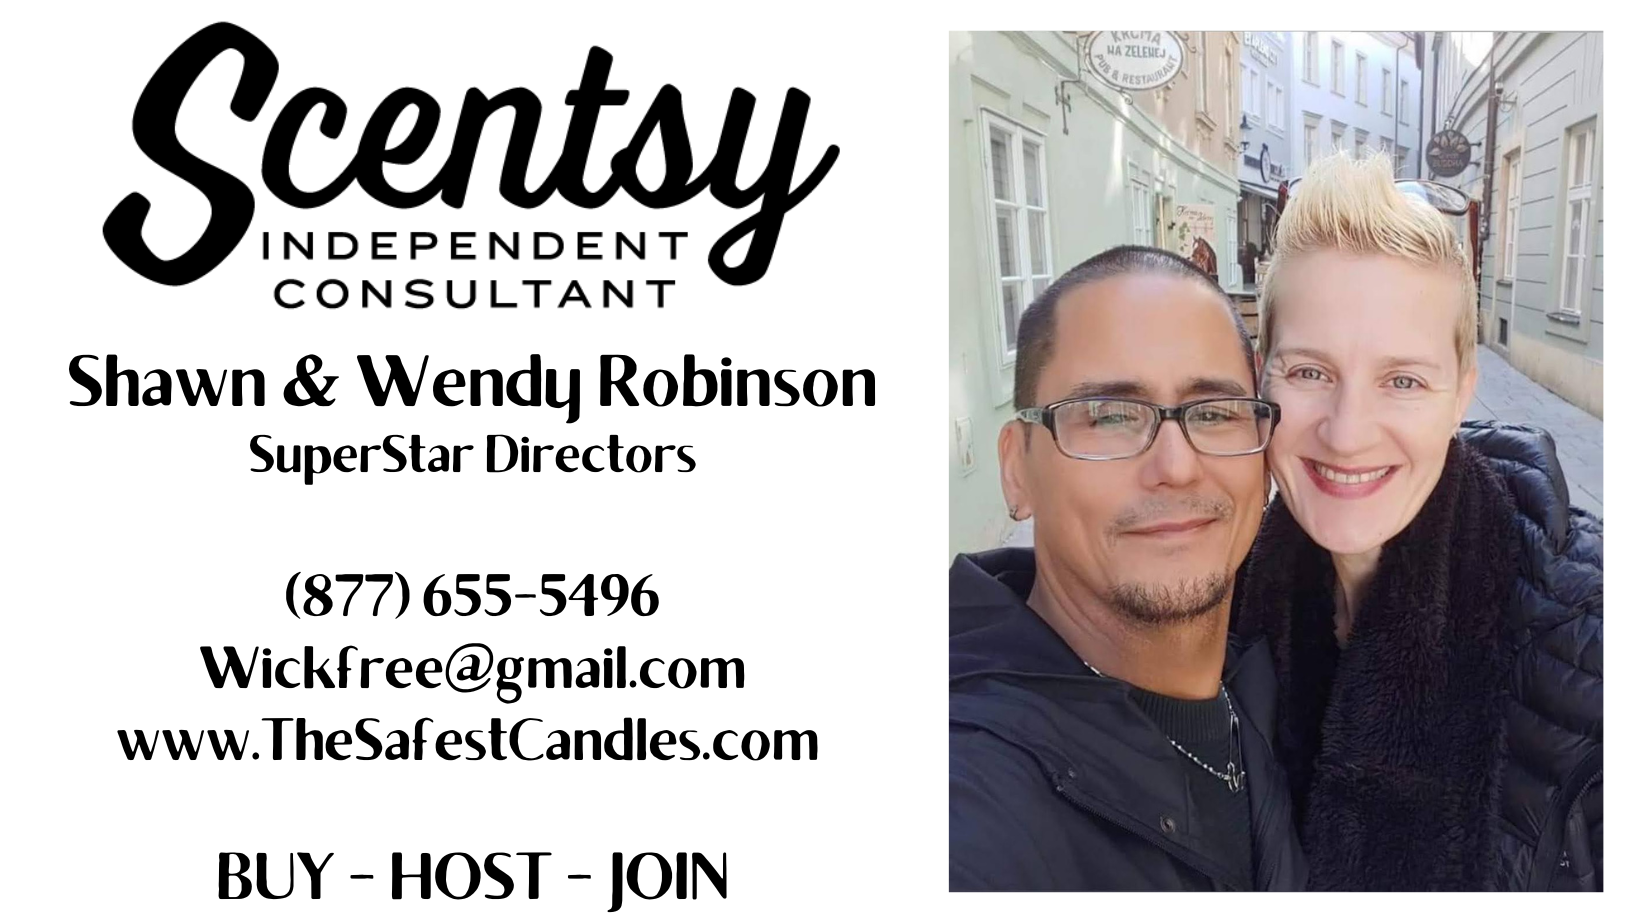 Scentsy Independent Consultants Shaw nAnd Wendy Robinson